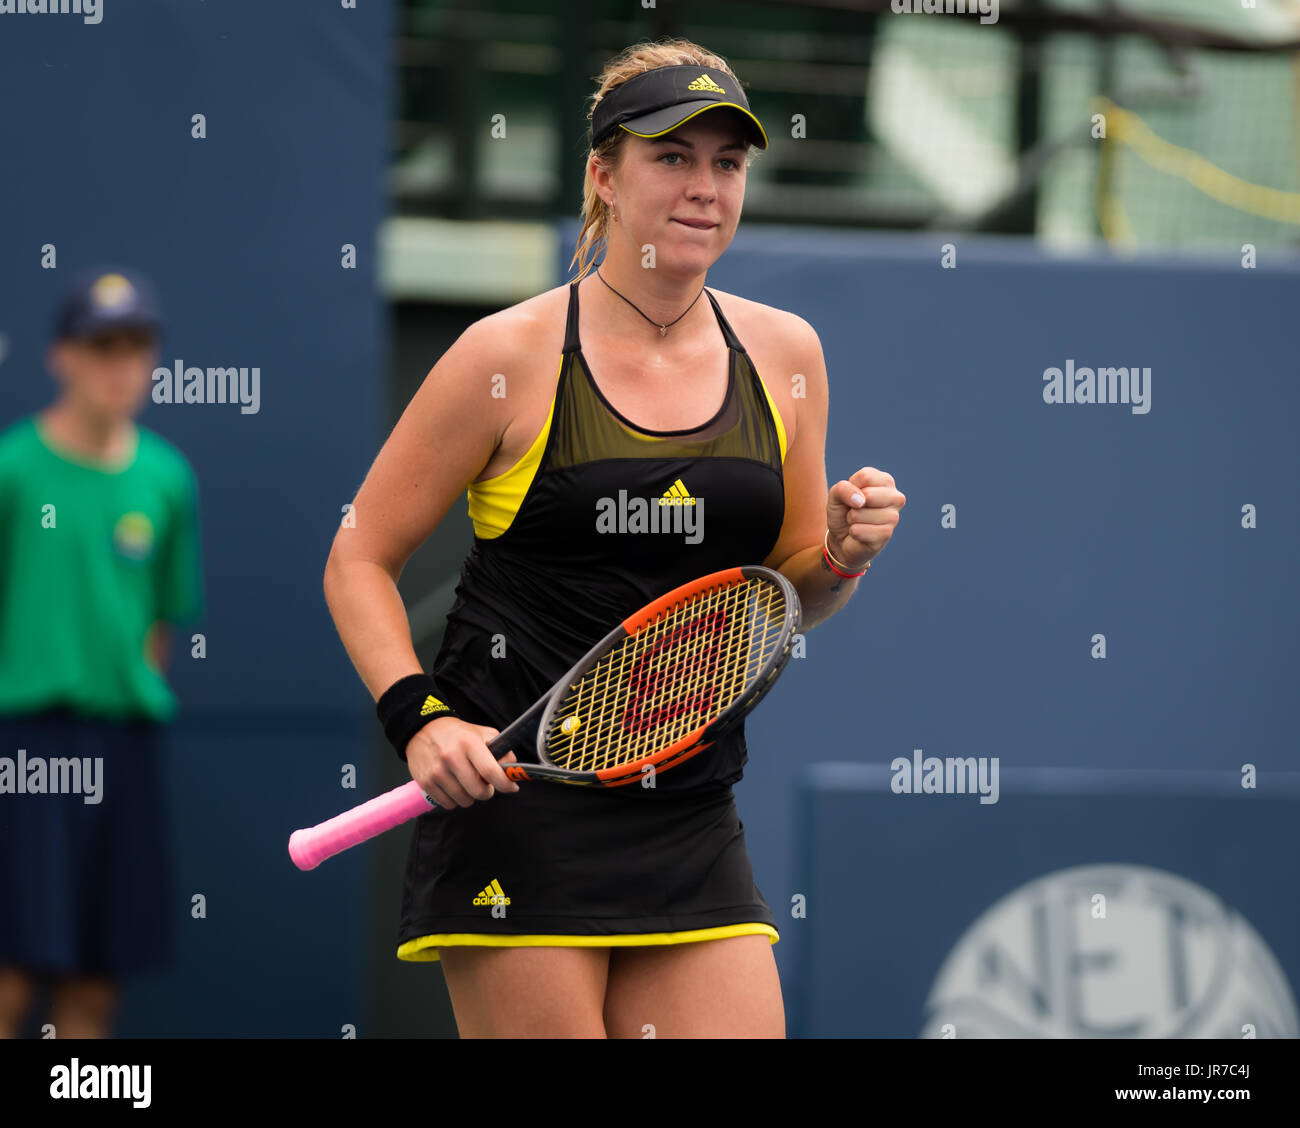 Stanford, United States. 3 August, 2017. Anastasia Pavlyuchenkova of Russia at the 2017 Bank of the West Classic WTA International tennis tournament © Jimmie48 Photography/Alamy Live News Stock Photo